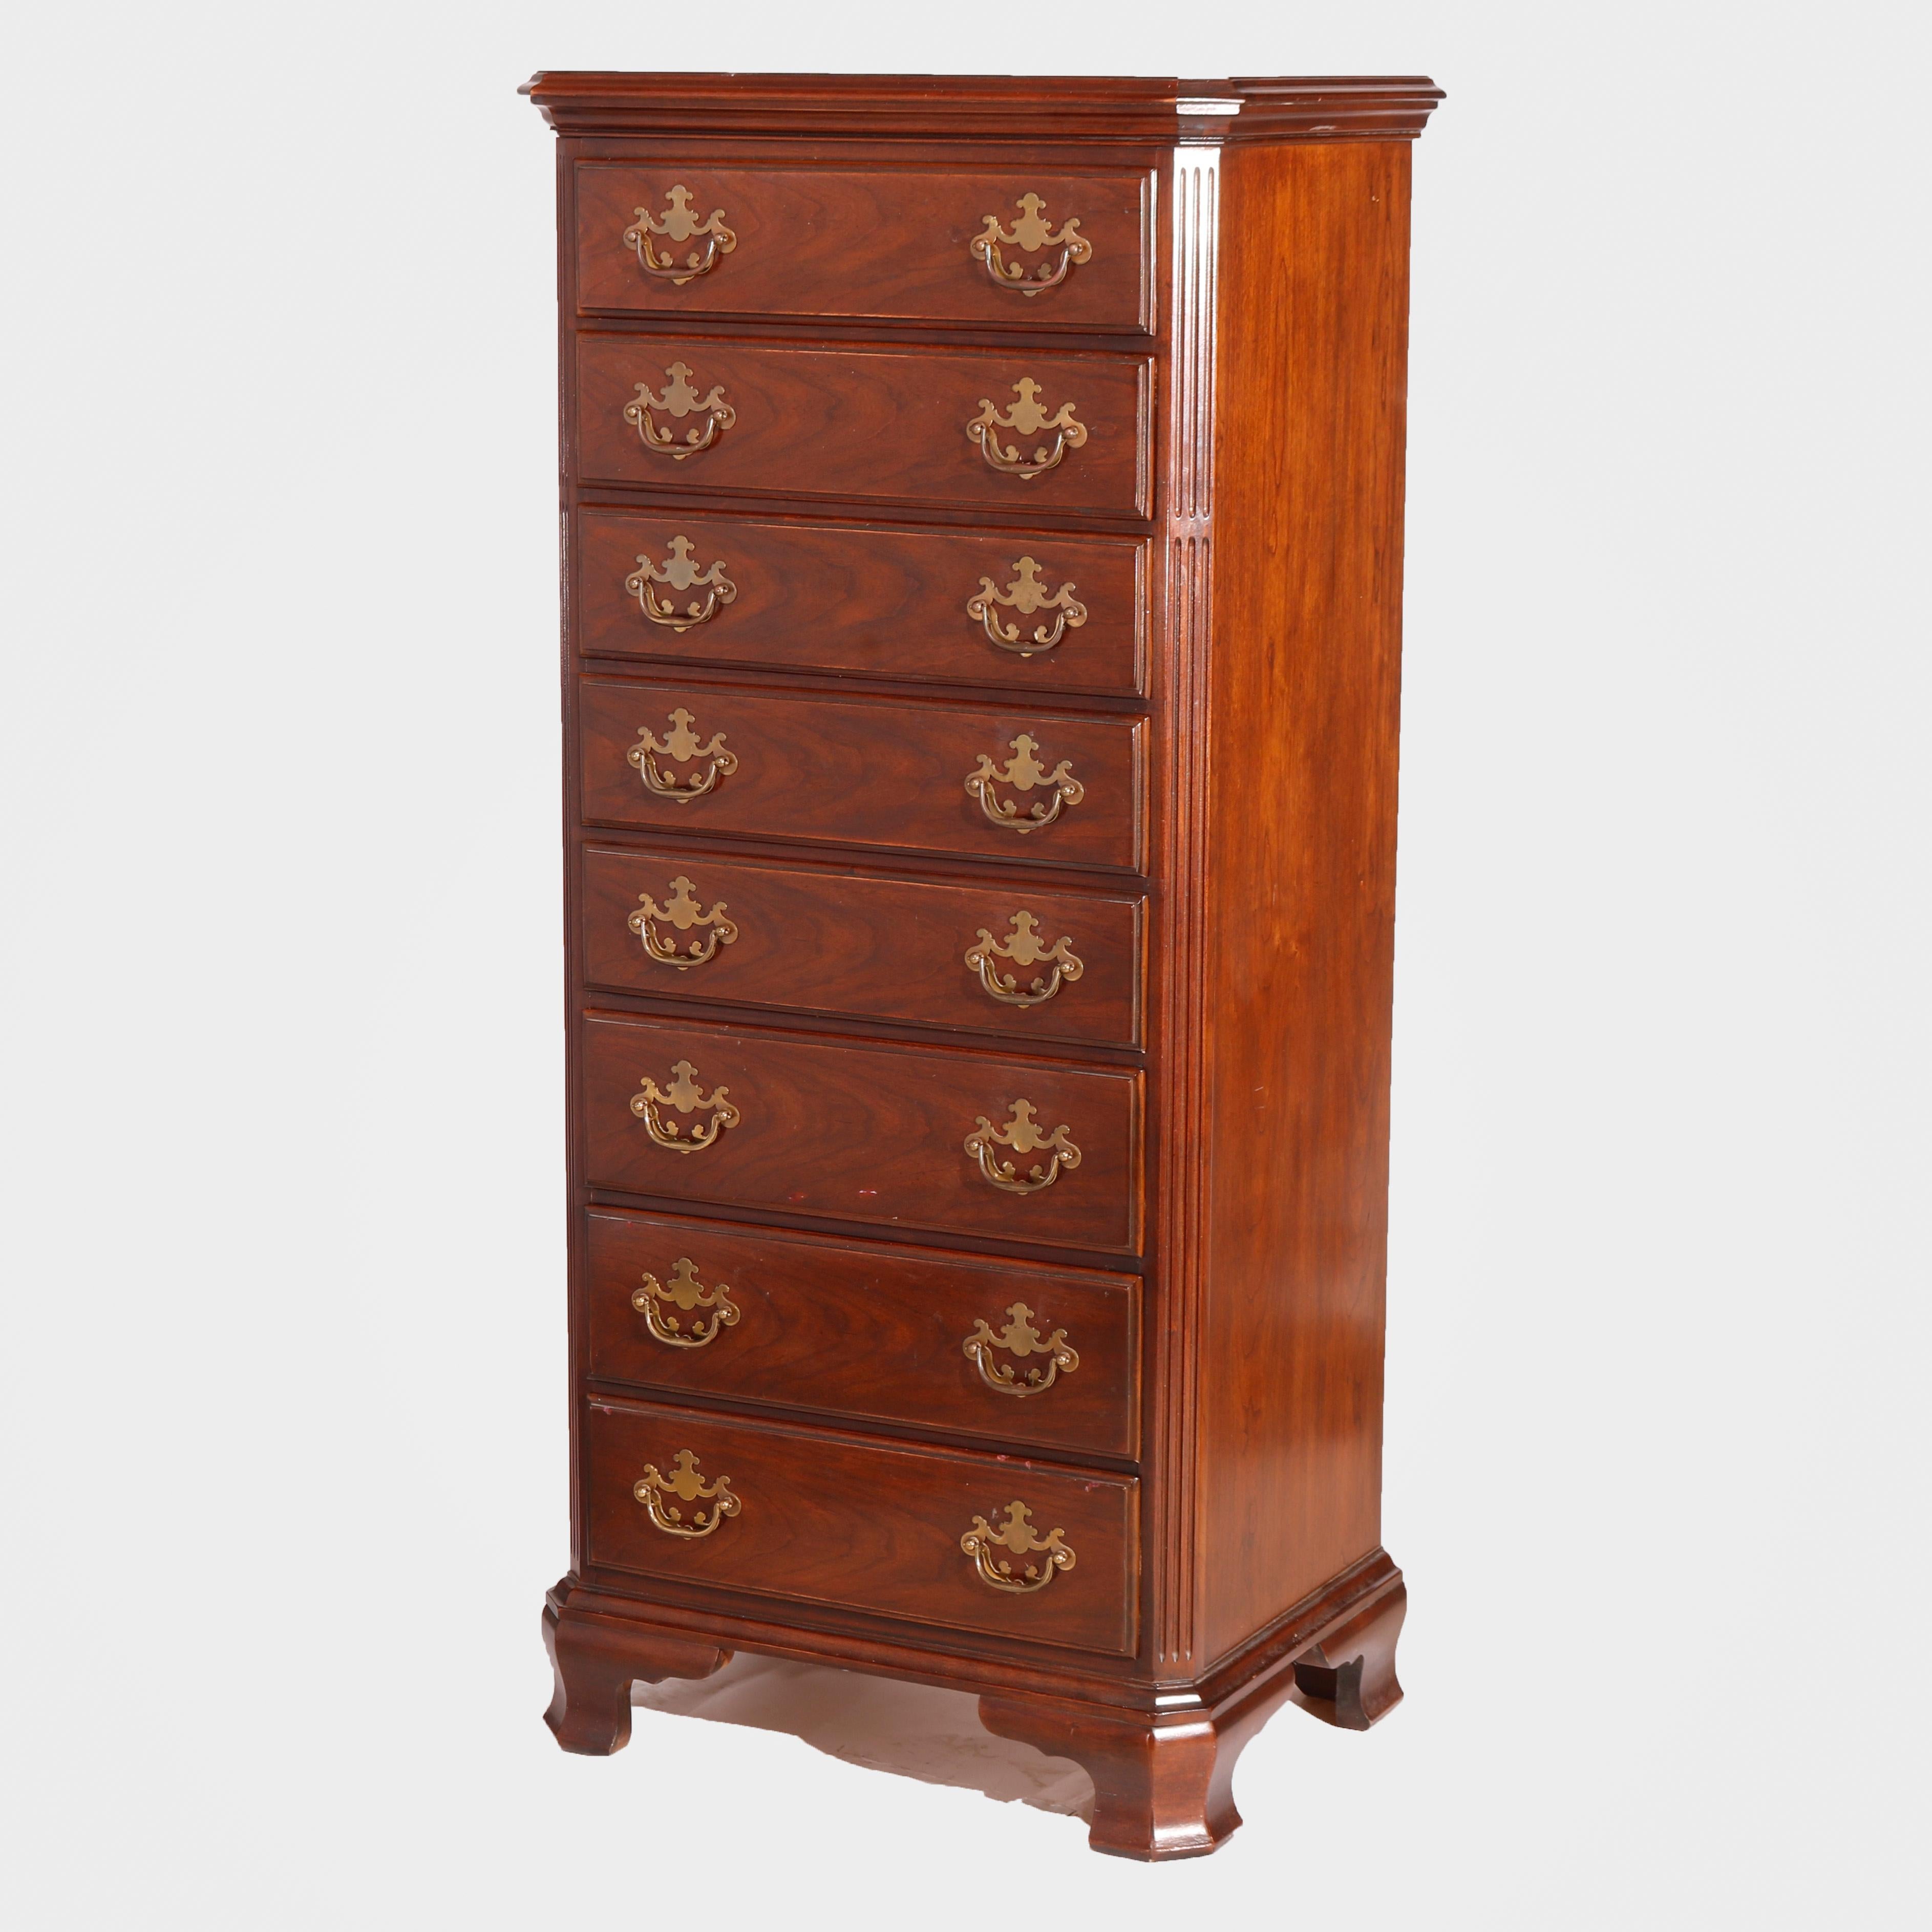 A Chippendale style lingerie chest by Drexel offers cherry construction with eight drawers having brass batwing pulls, raised on bracket feet, maker mark as photographed, 20th century.

Measures - 53.5